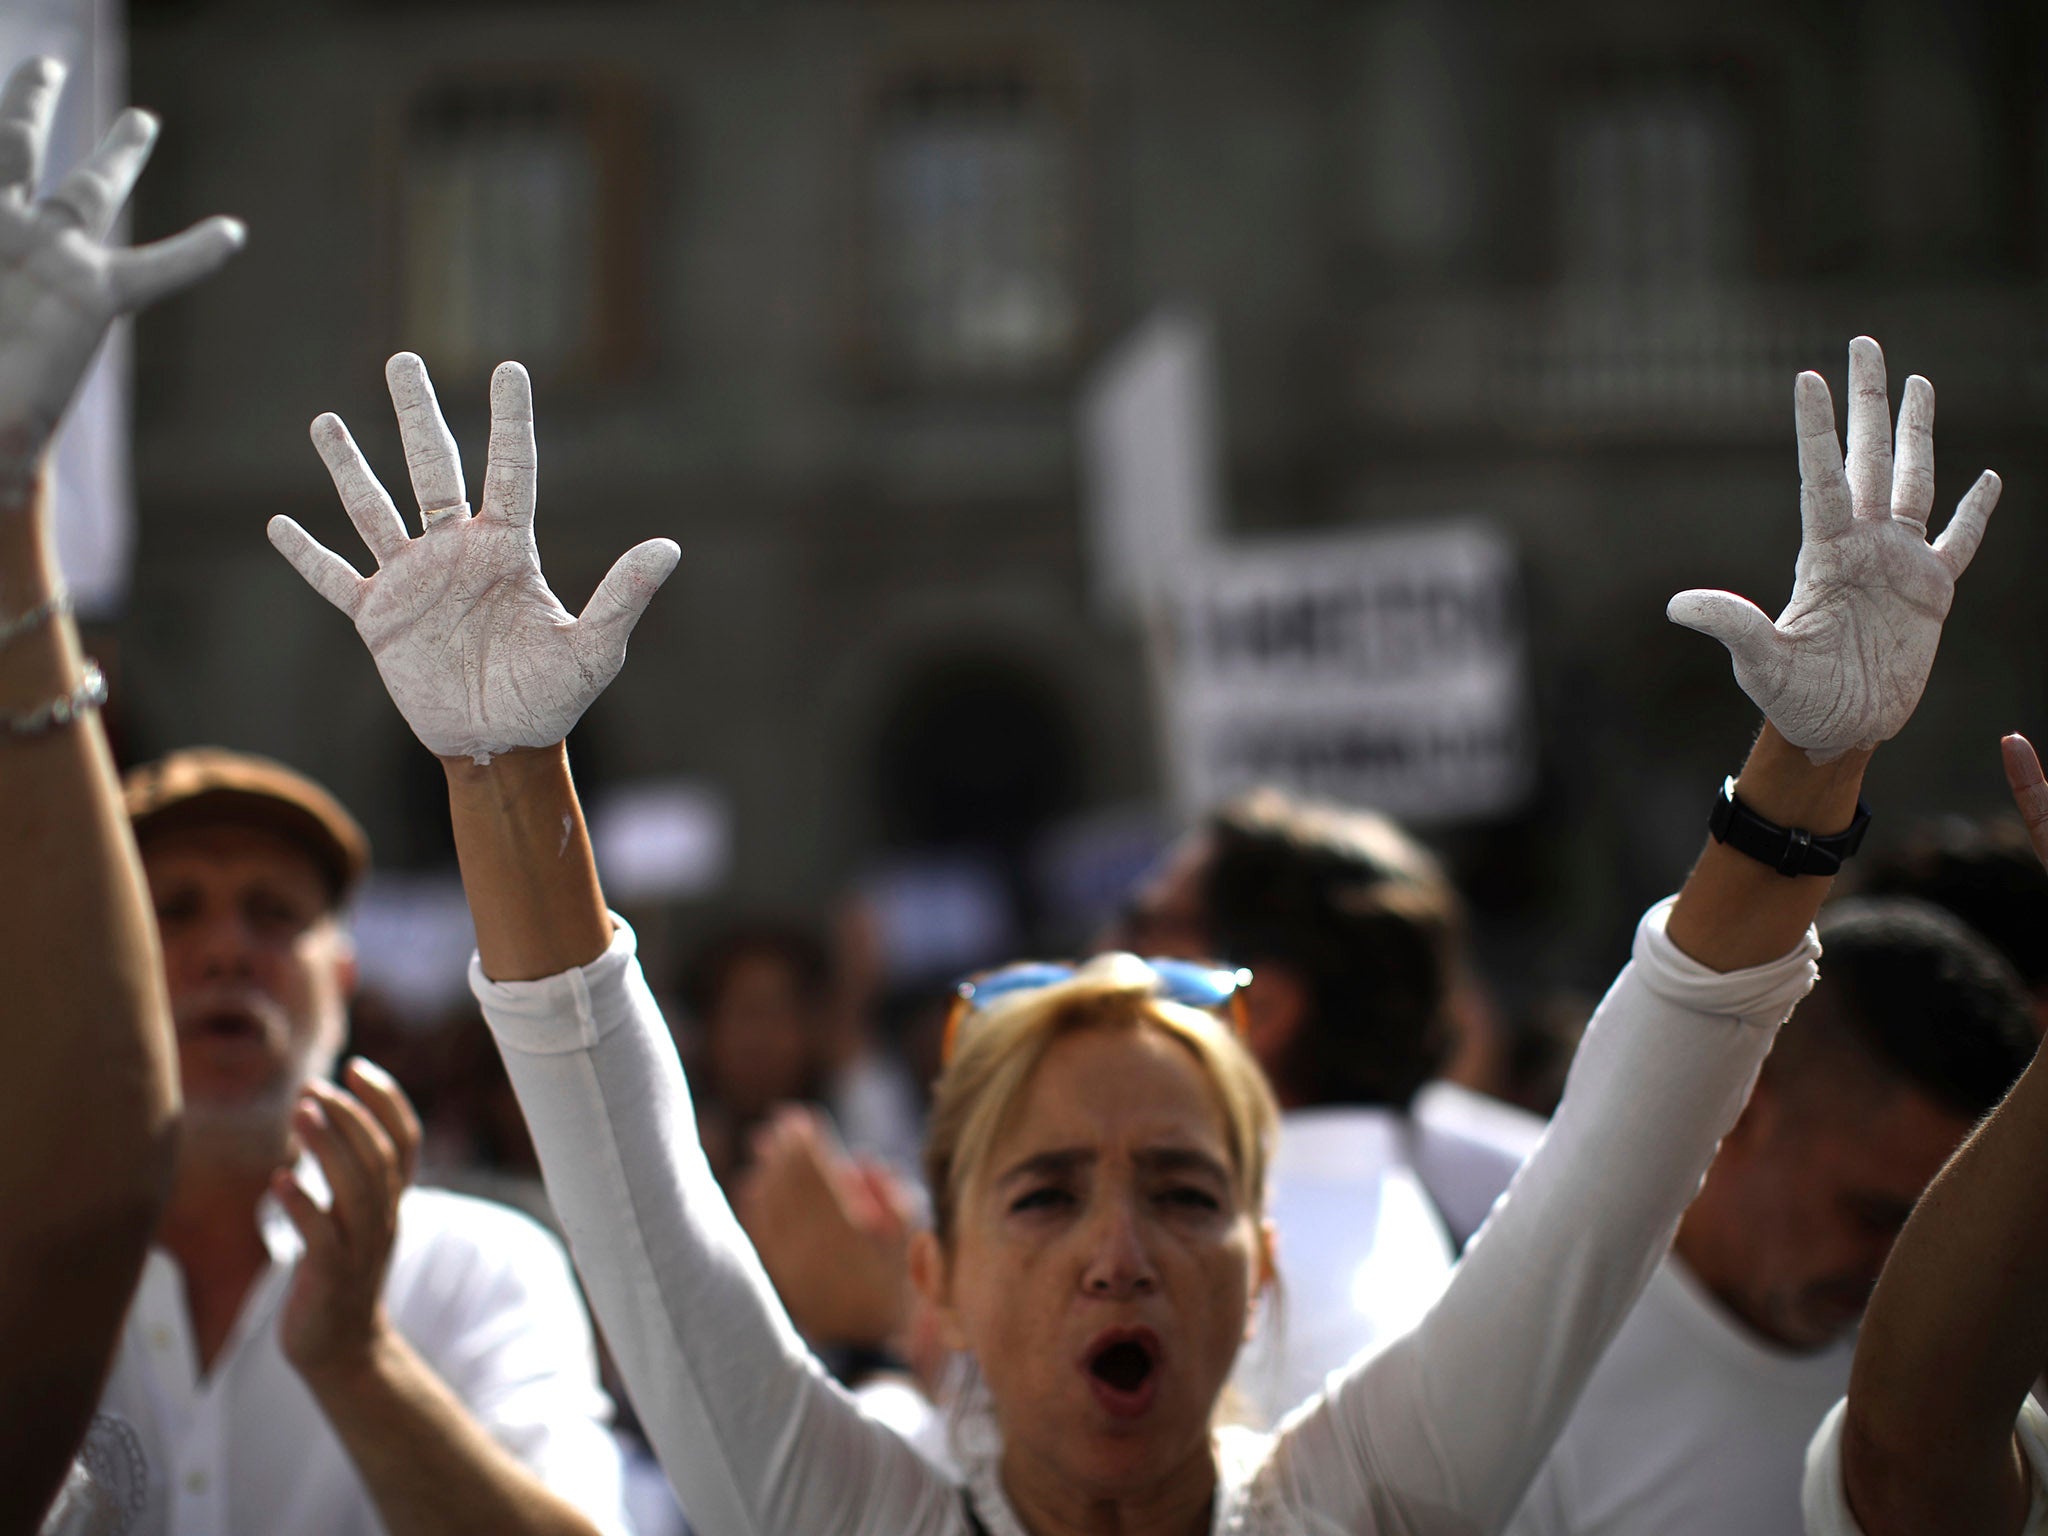 People raise their hands painted in white, to symbolise they are in favour of talks, in Sant Jaume Square in Barcelona